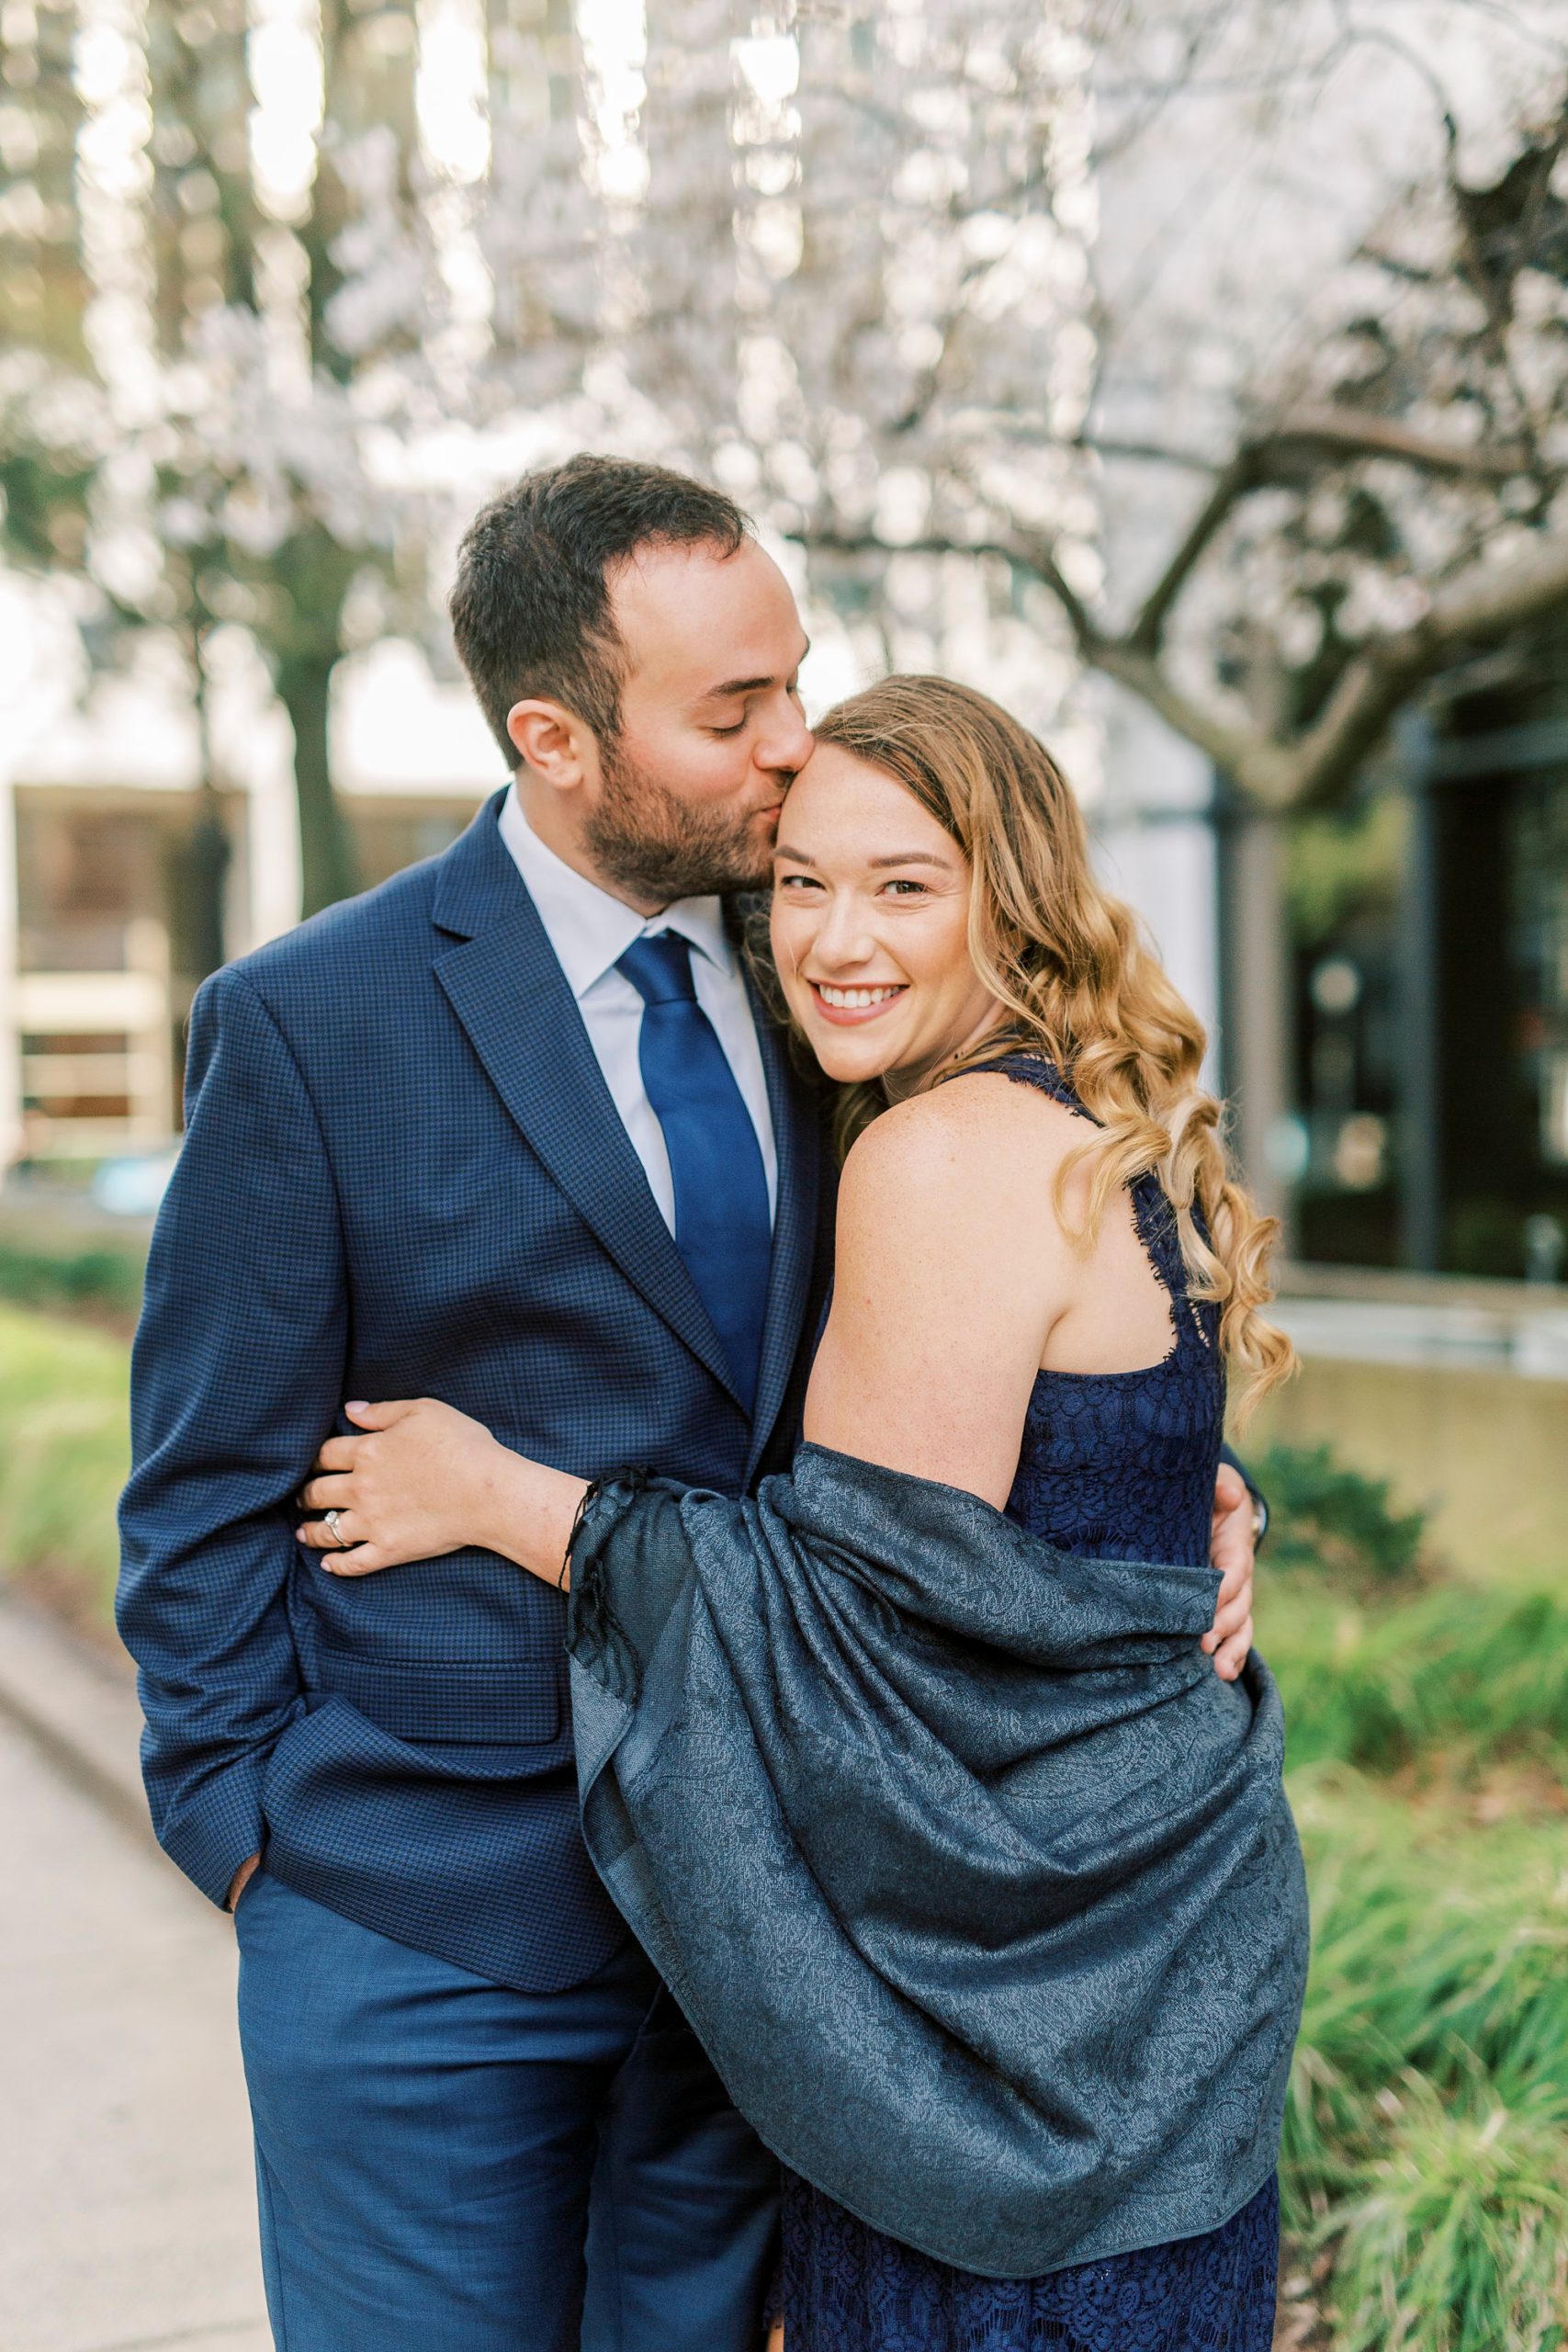 groom kisses bride's forehead in Uptown Charlotte during engagement photos